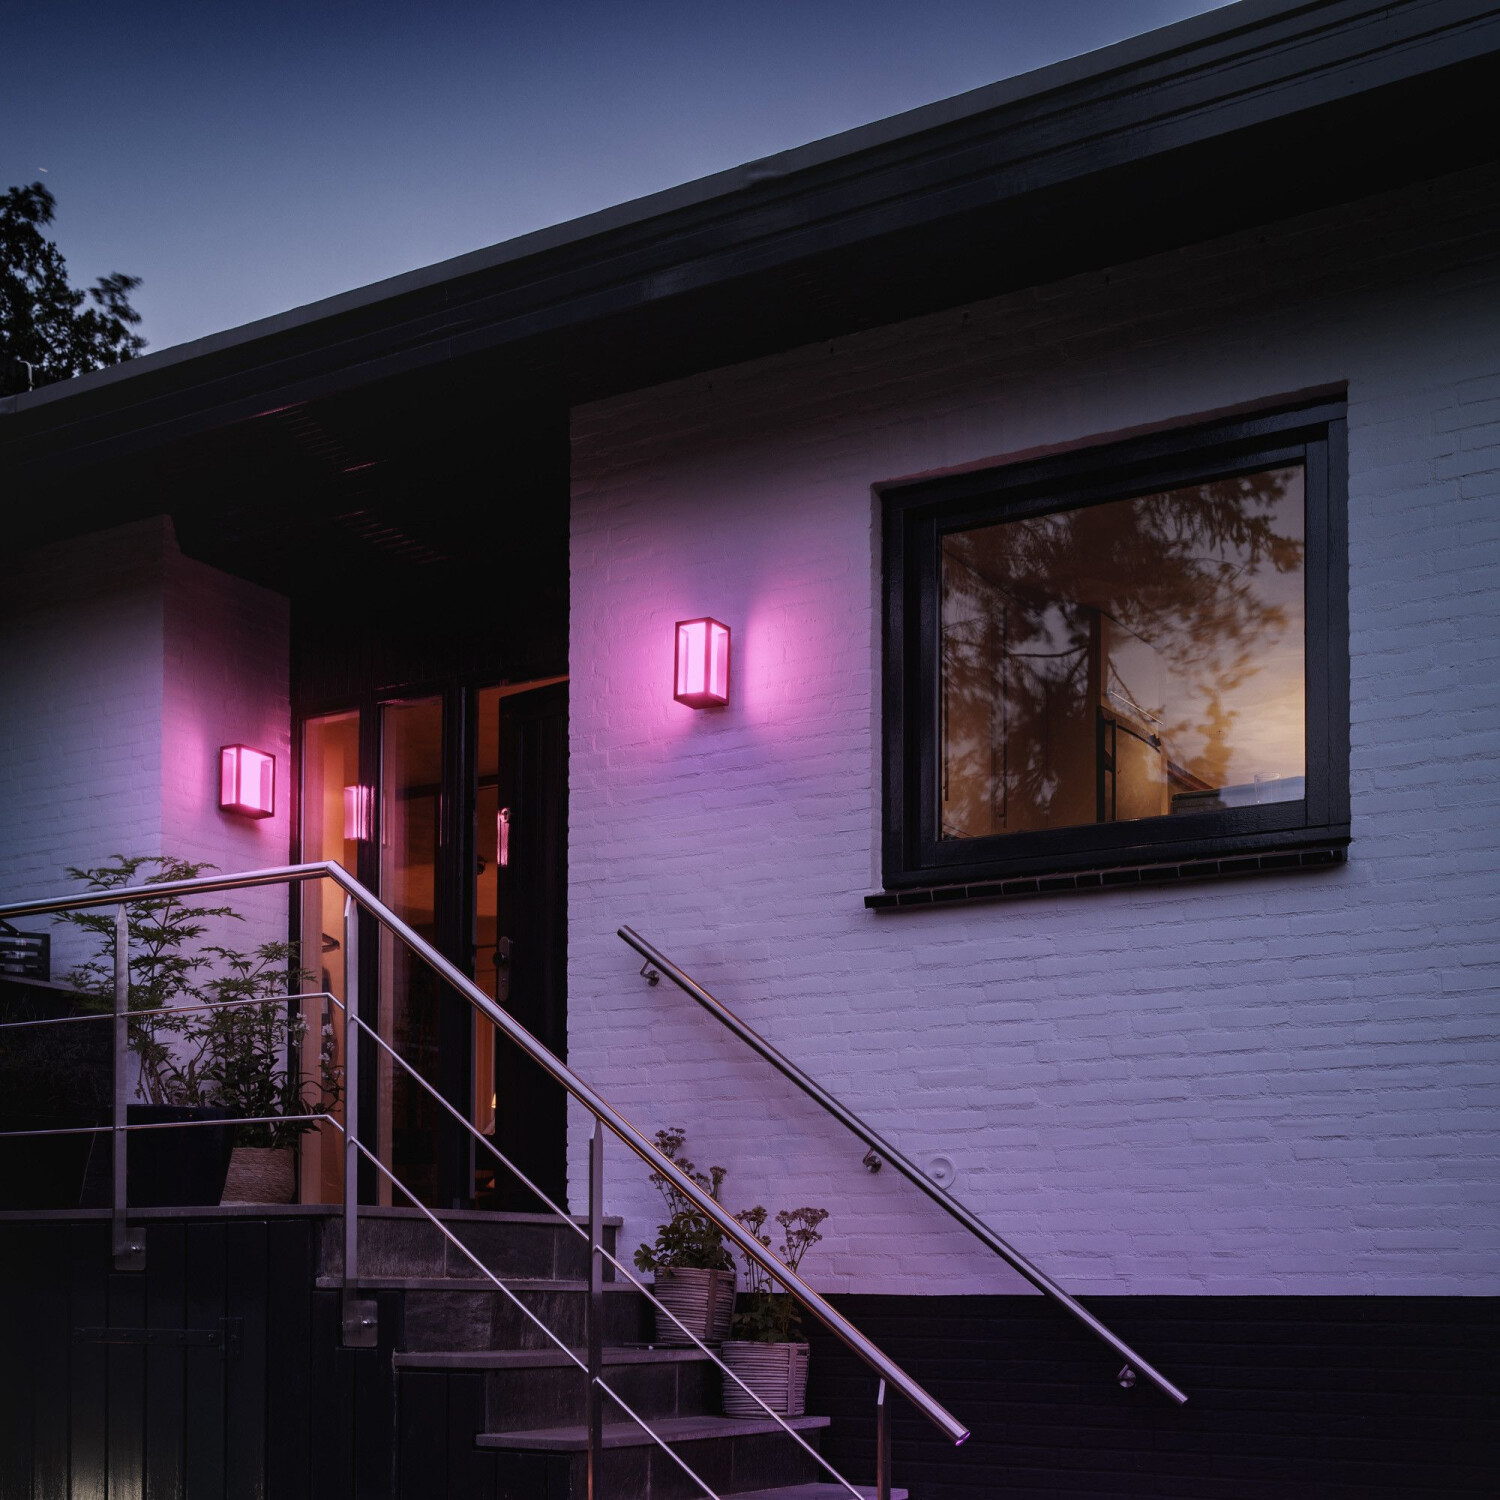 Philips Hue White and | bei (17429/30/P7) LED € Preisvergleich Impress 94,99 Ambiance ab Color